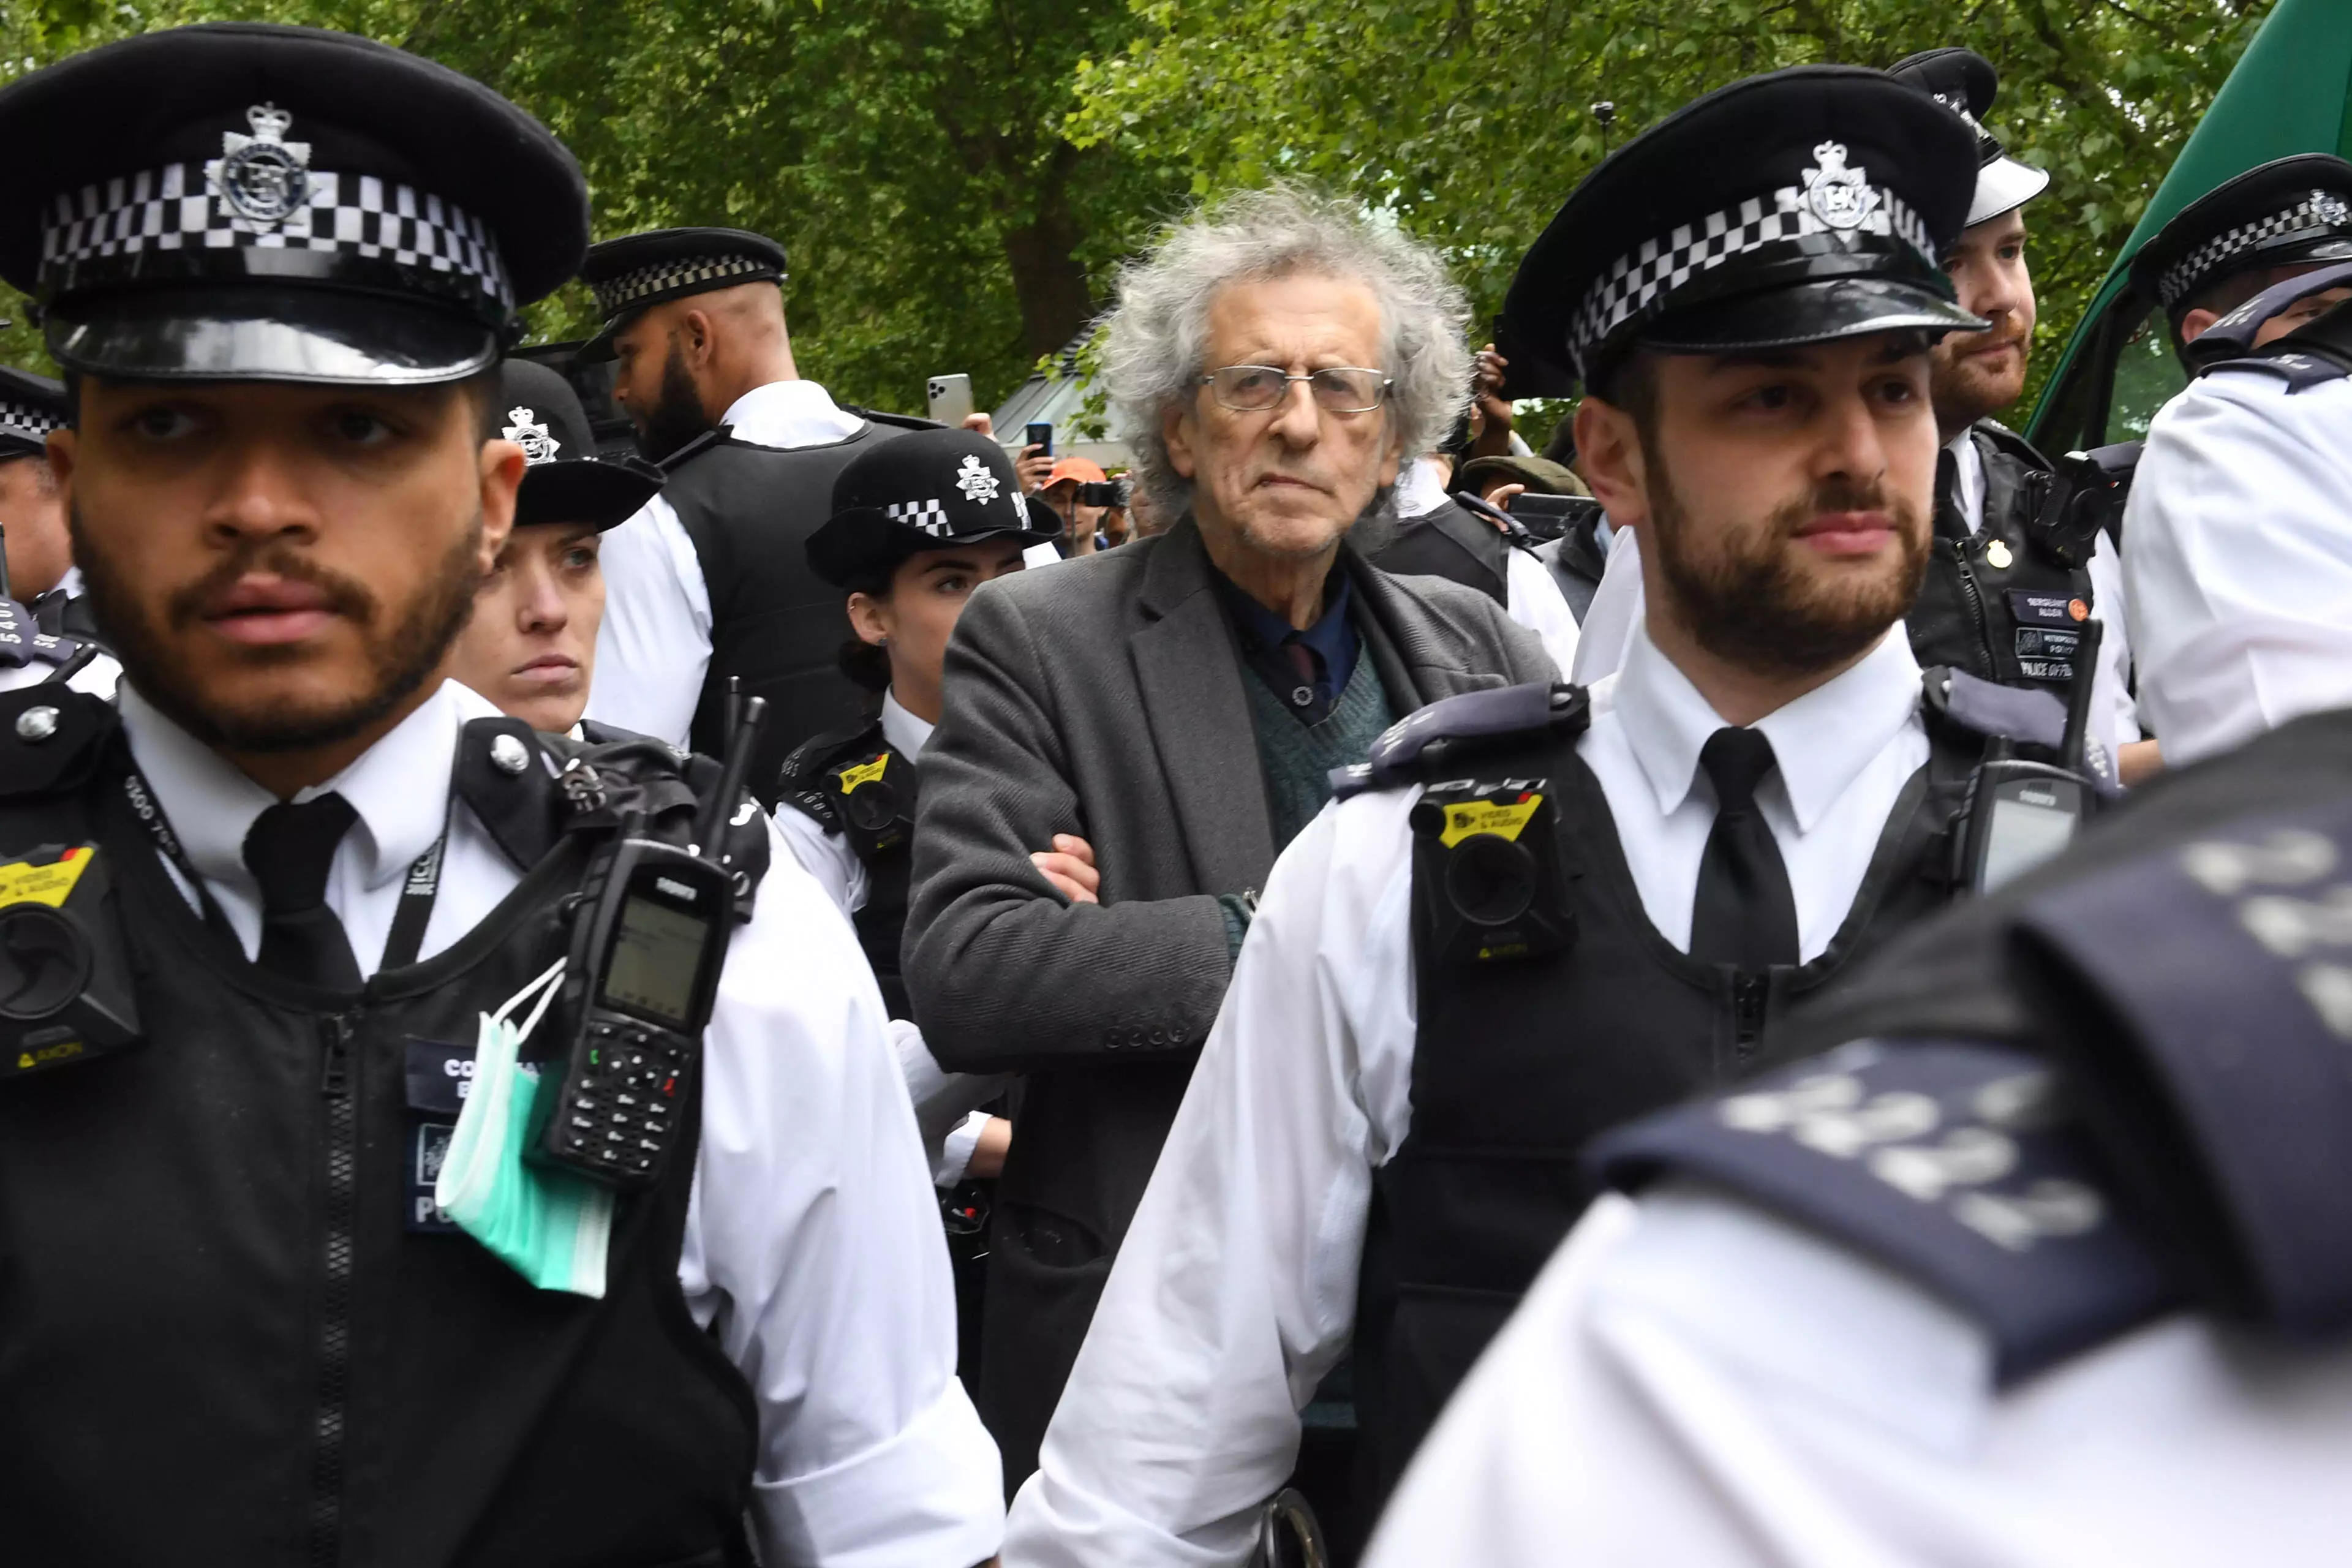 Piers Corbyn was led off by police.